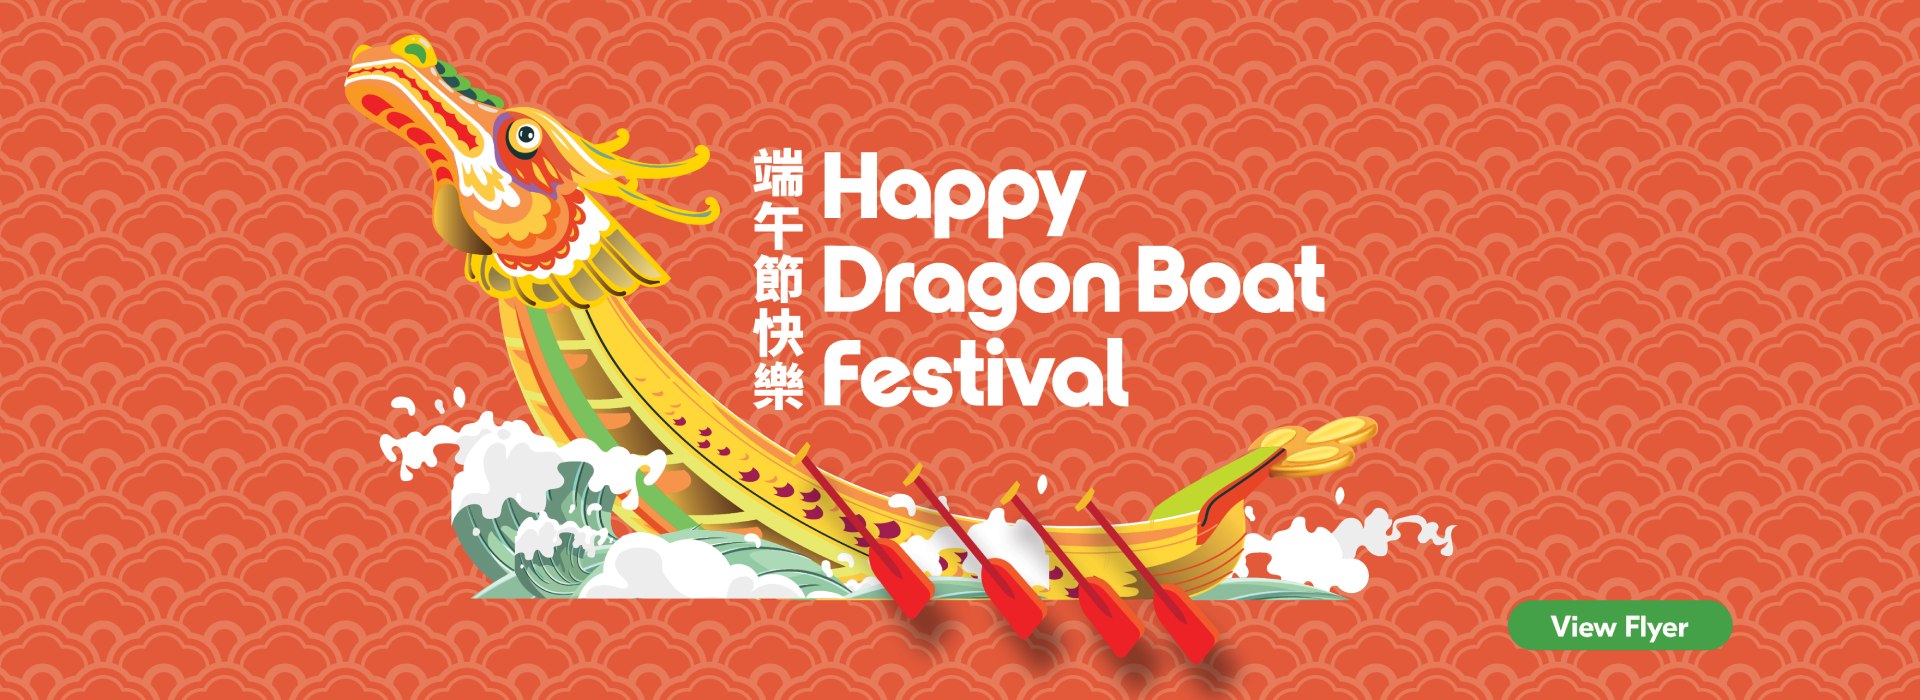 The following image contains the text, "Â Happy Dragon Boat Festival along with the 'view flyer' button."